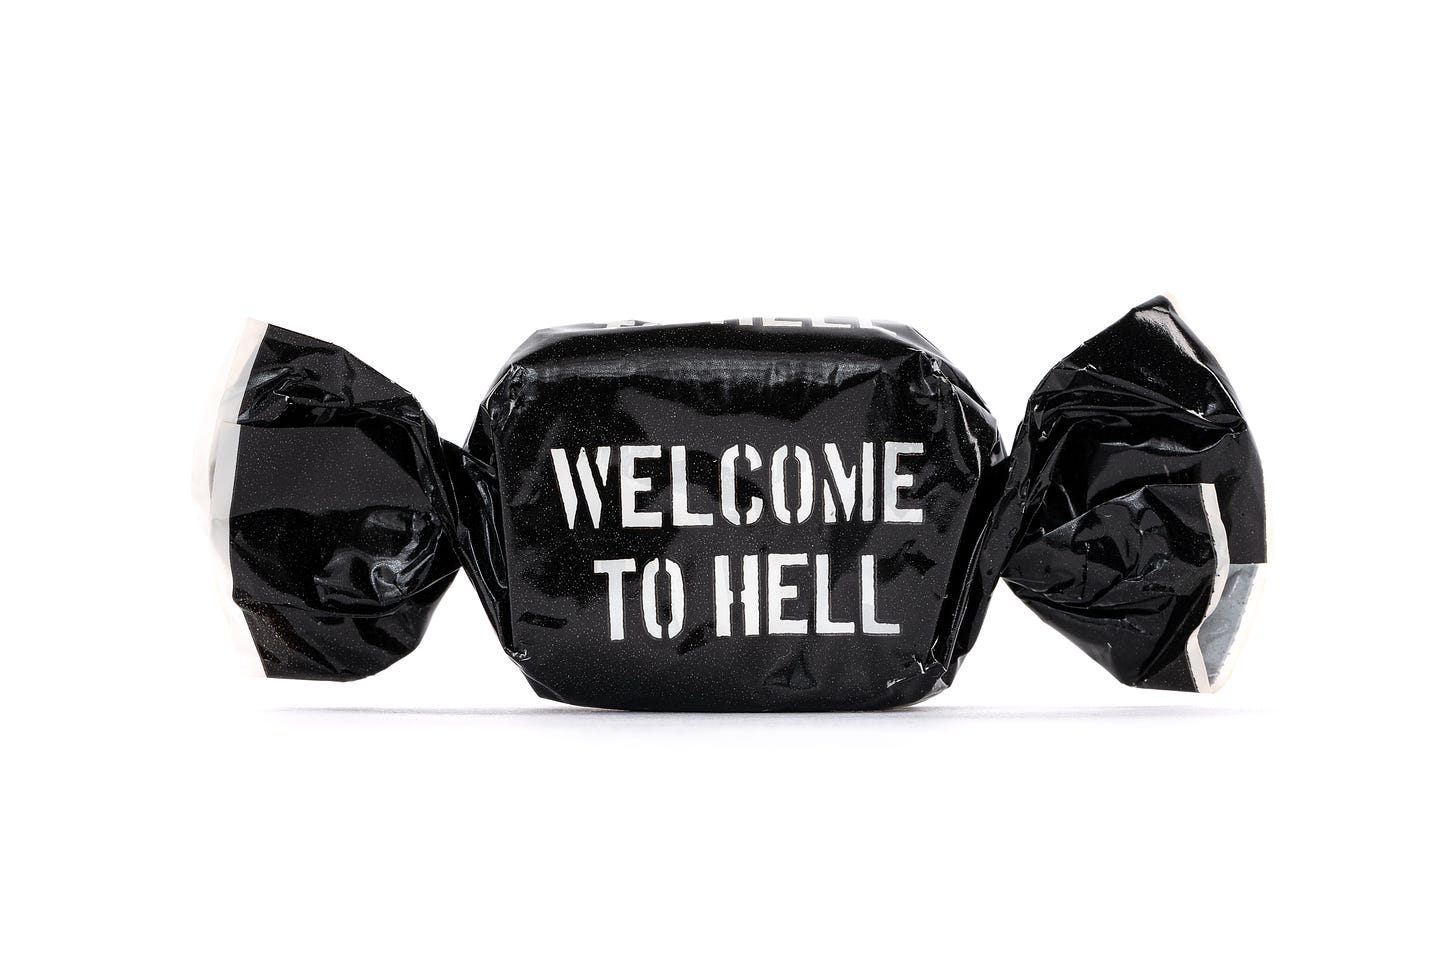 Picture of a wrapped sweet against a white background. The wrapper is black and has the text 'Welcome to Hell' written on it.